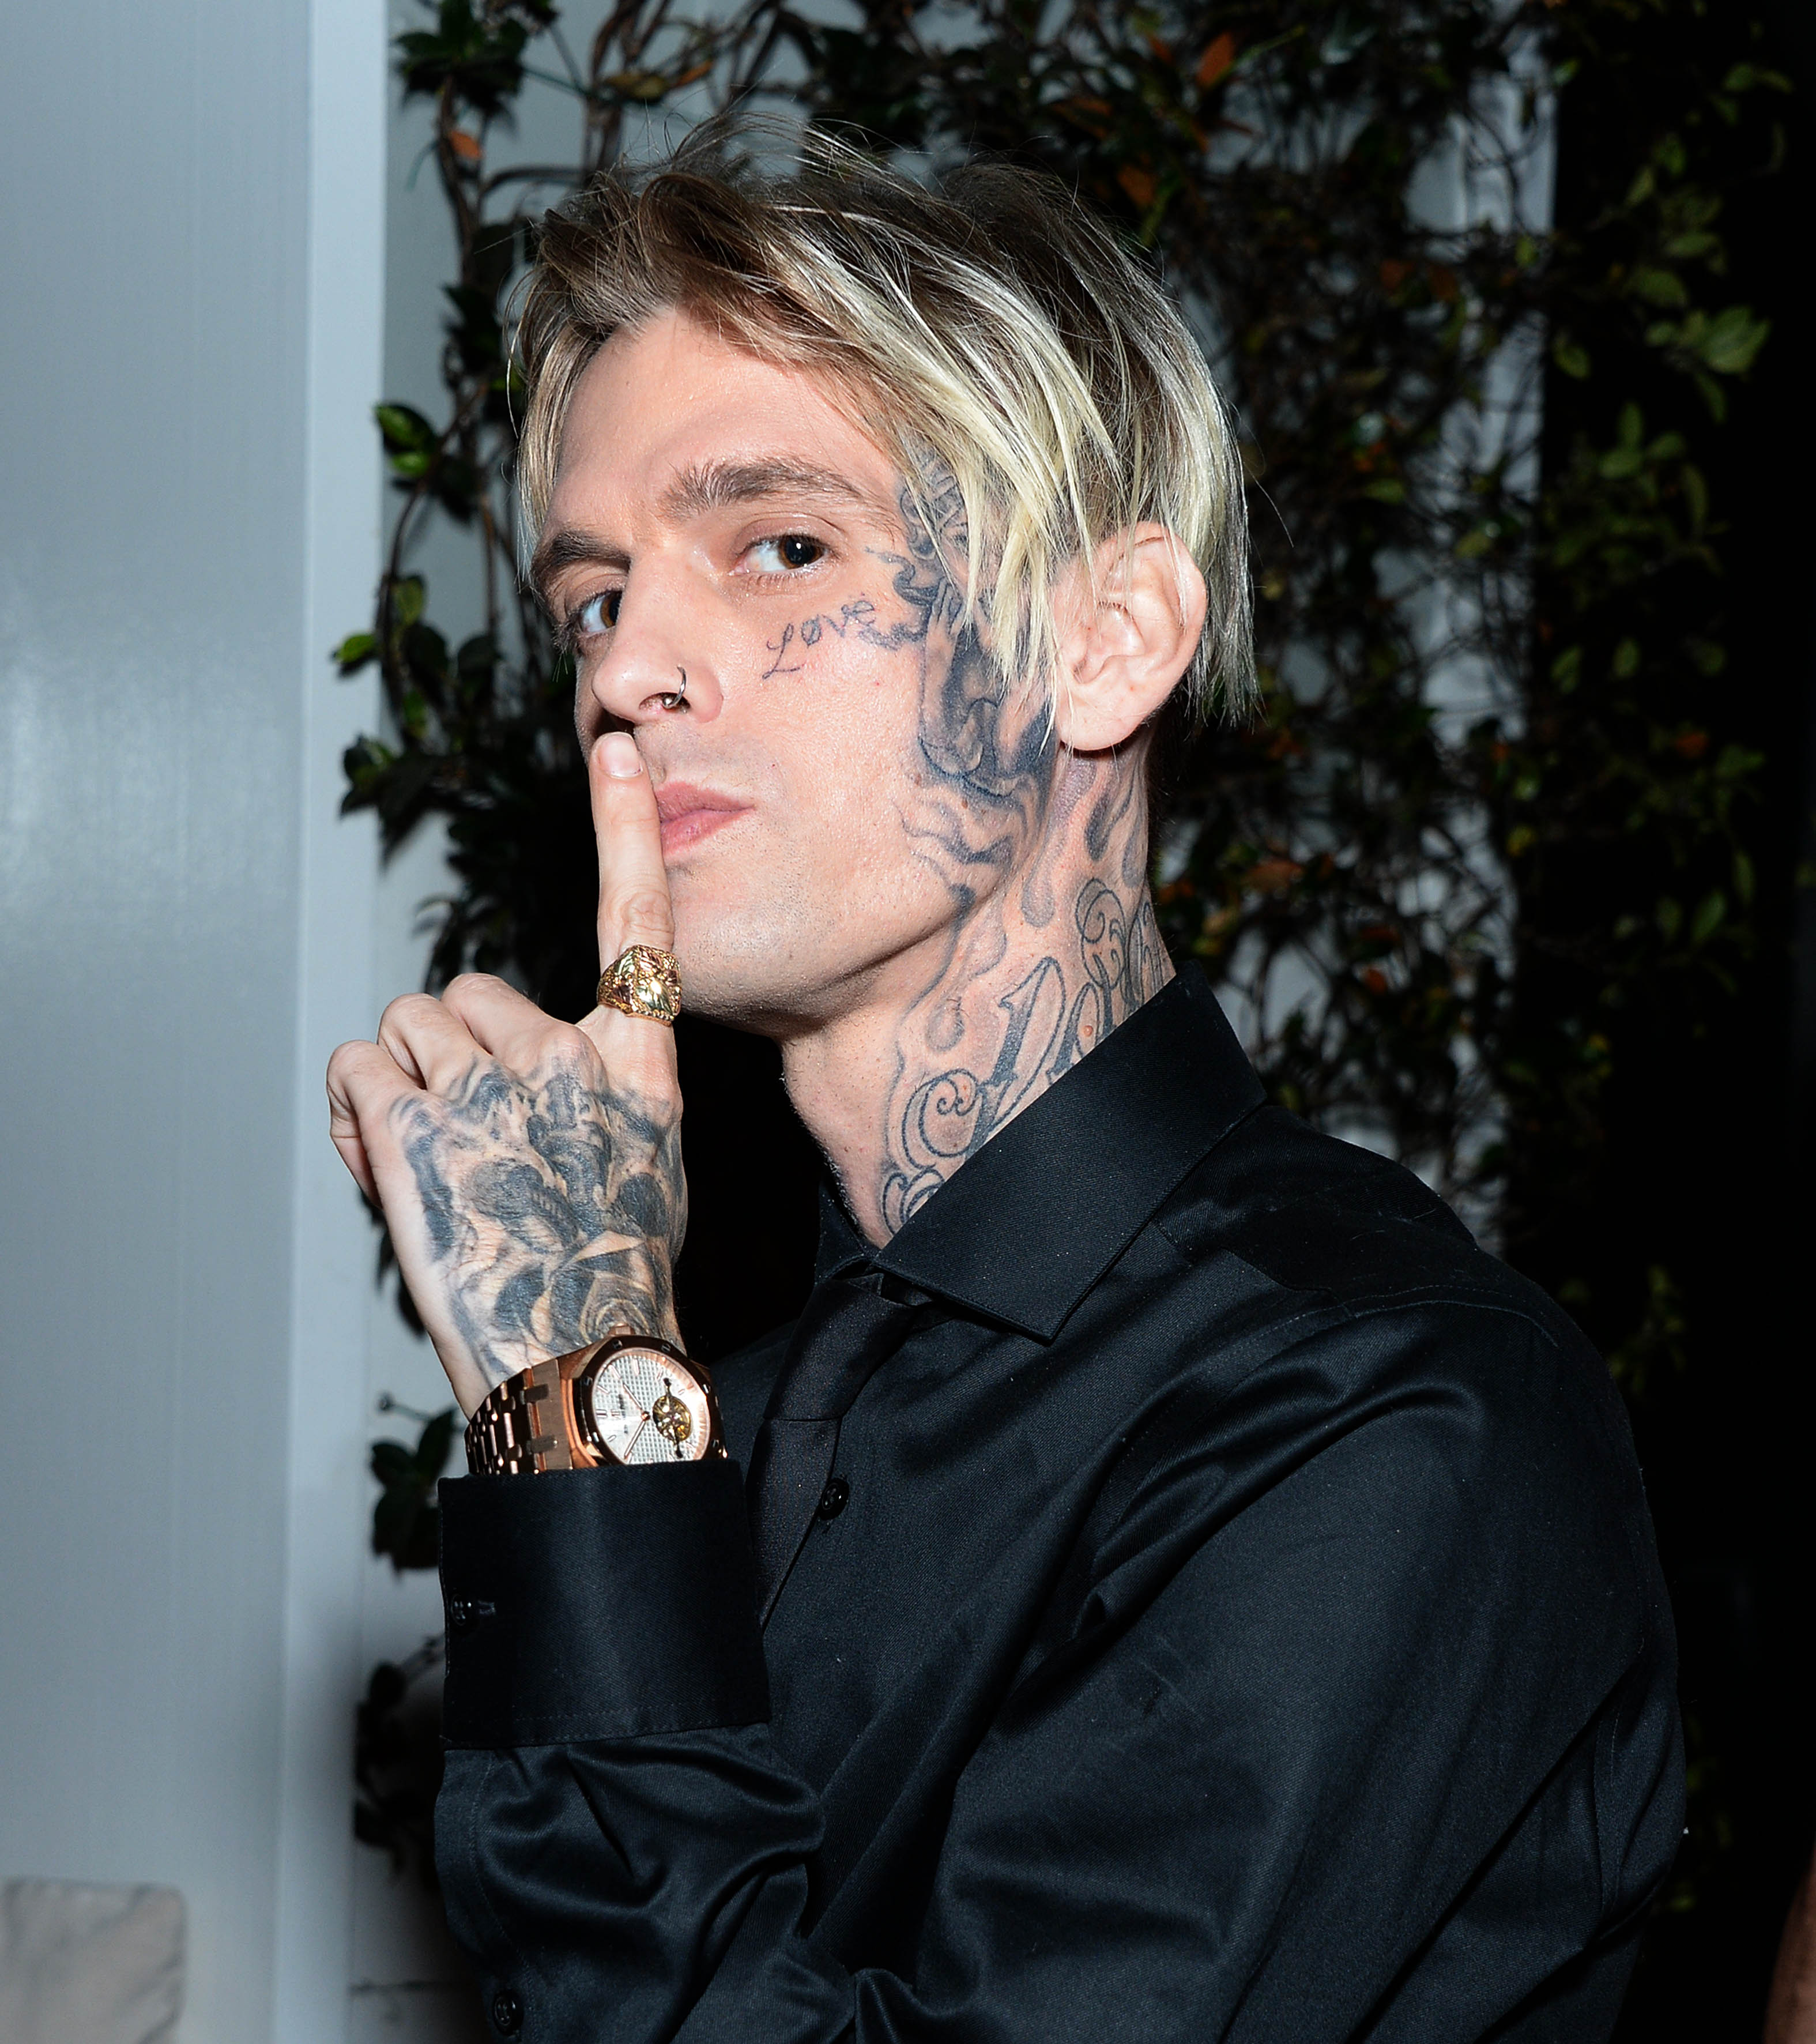 Aaron Carter Gets Giant Butterfly Face Tattoo in Honor of His Late Sister   Entertainment Tonight